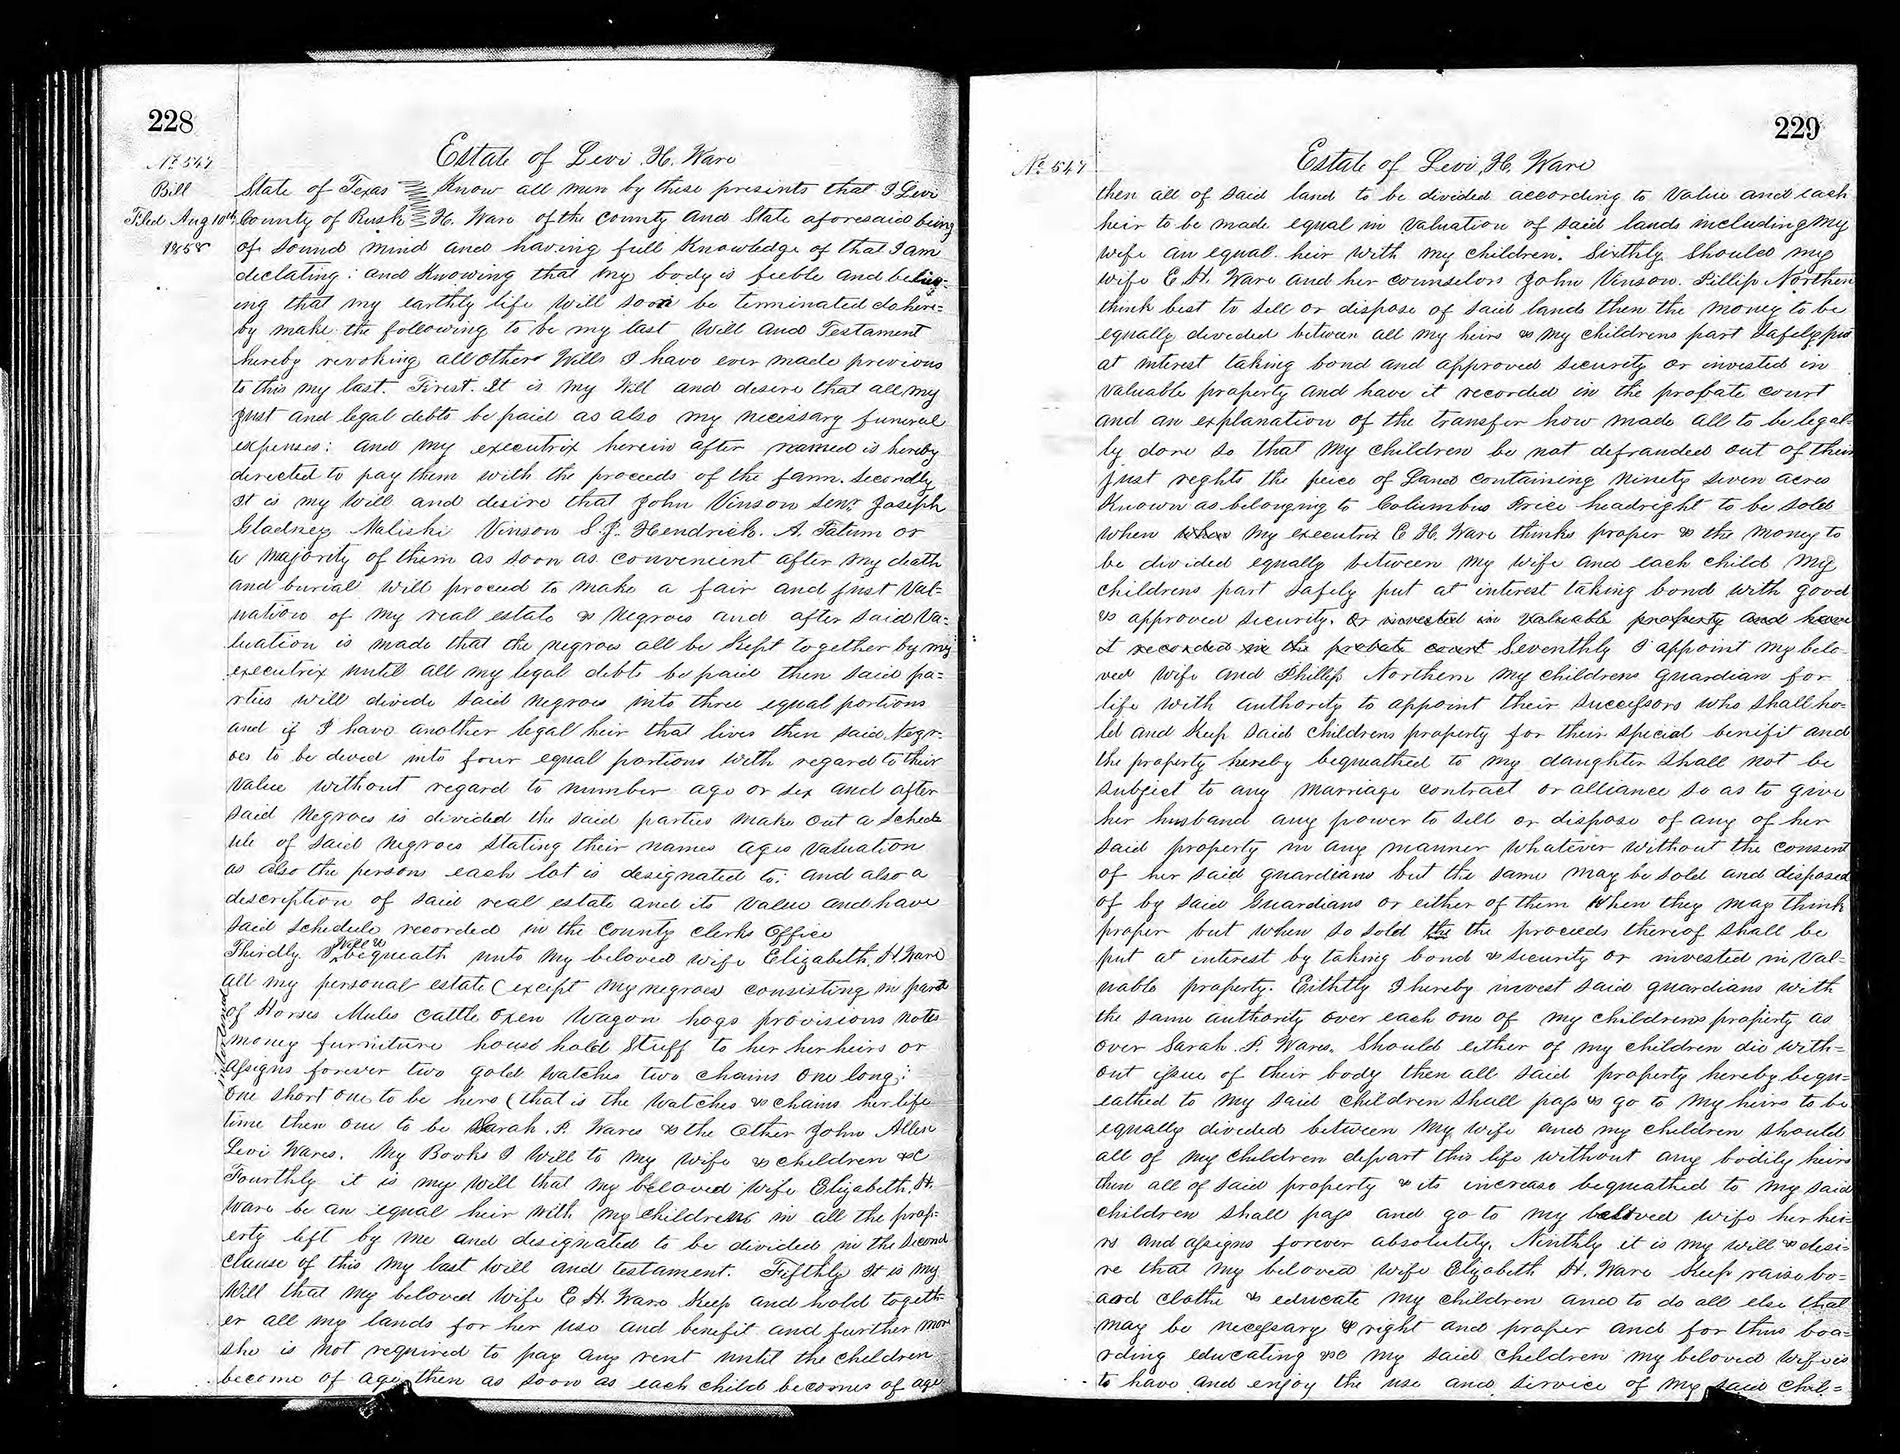 Two photocopied pages from Levi Hill Ware's handwritten will